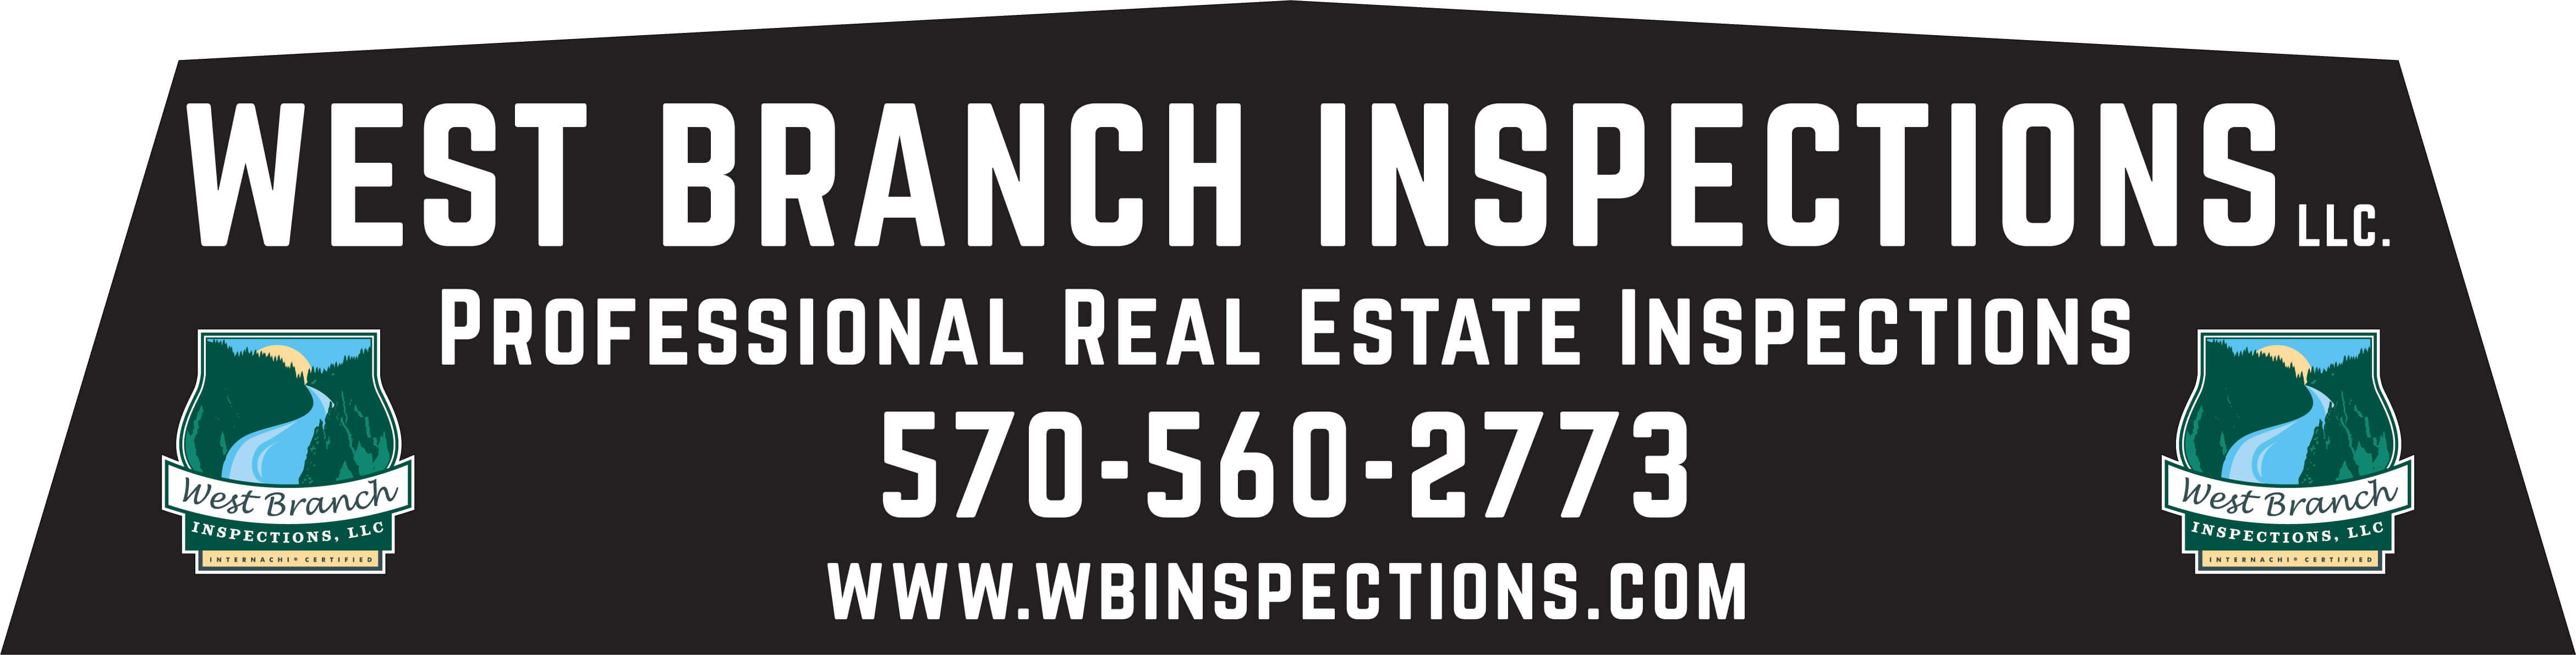 West Branch Inspections